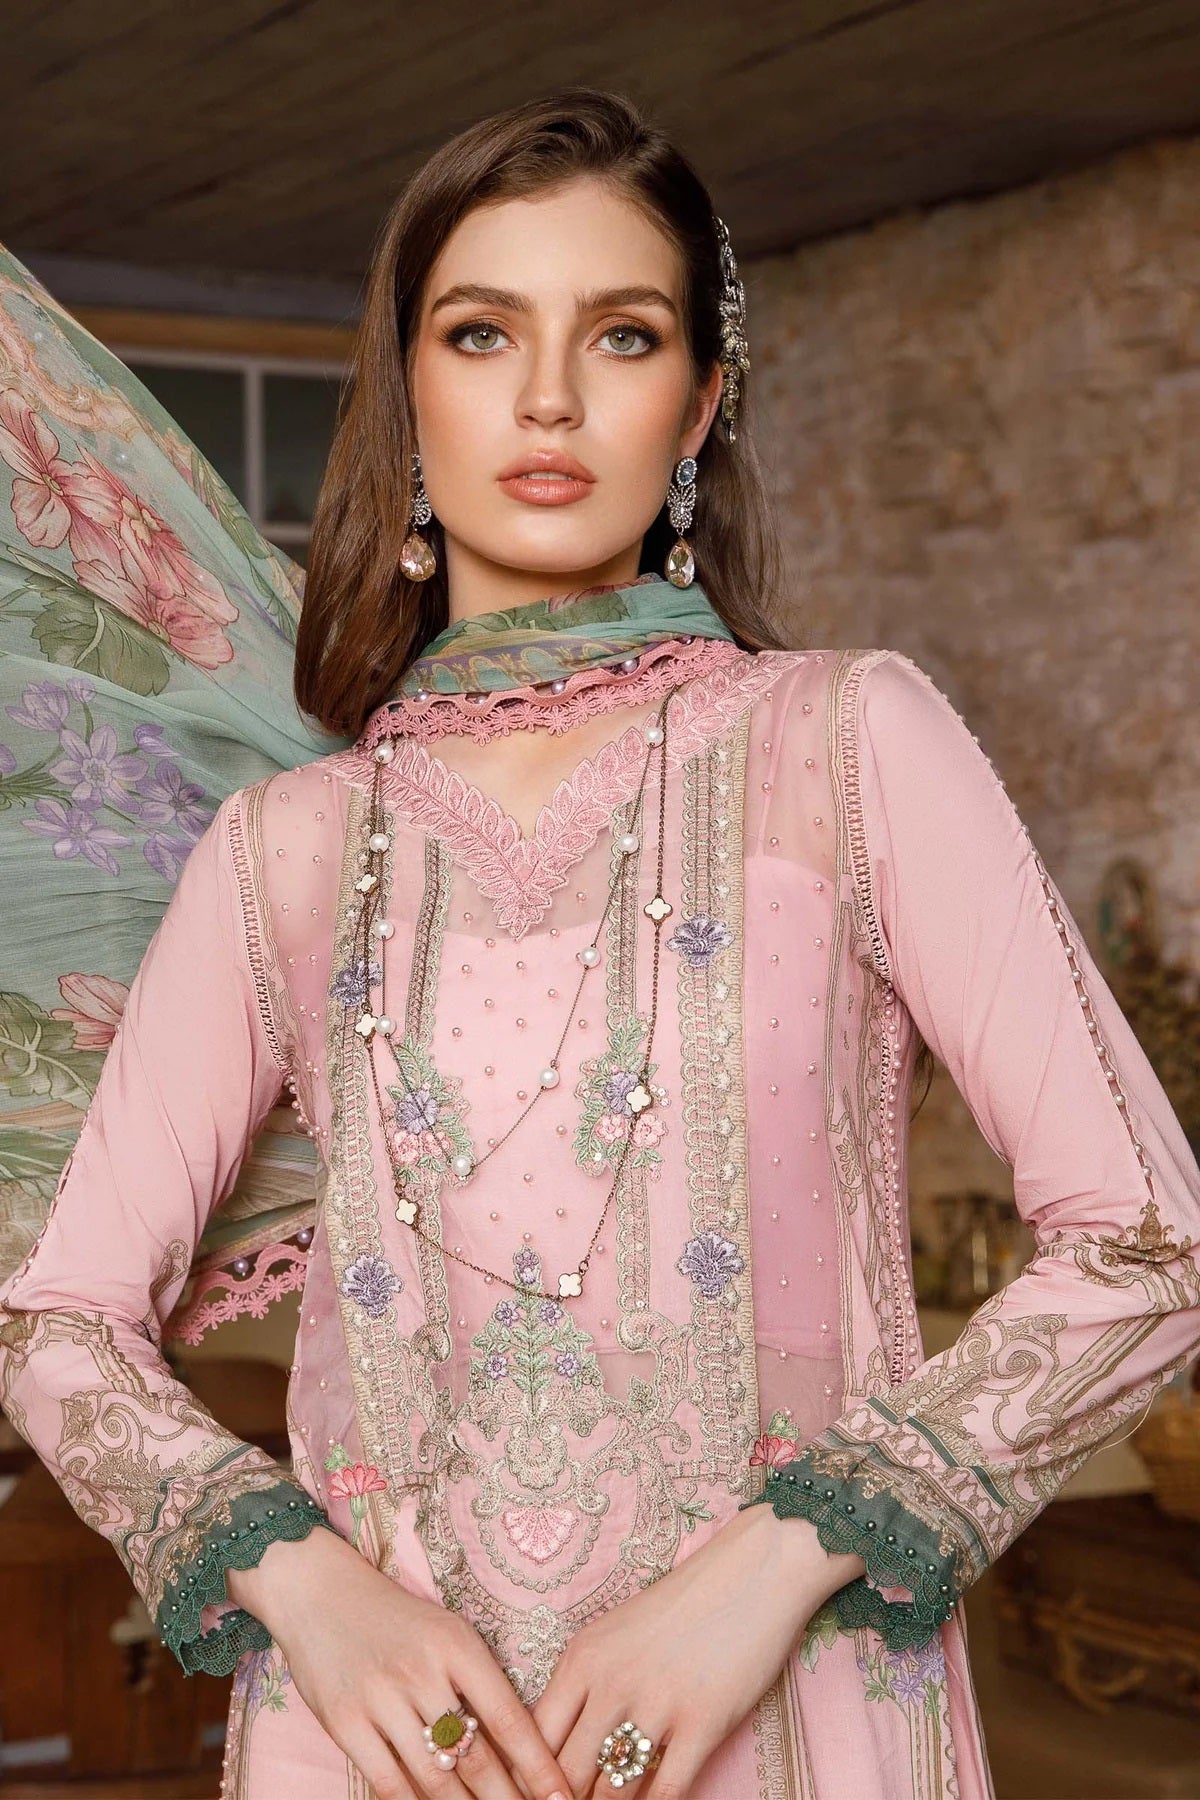 MPrints By Maria B Embroidered Lawn Suits Unstitched 3 Piece MPT-1713-A